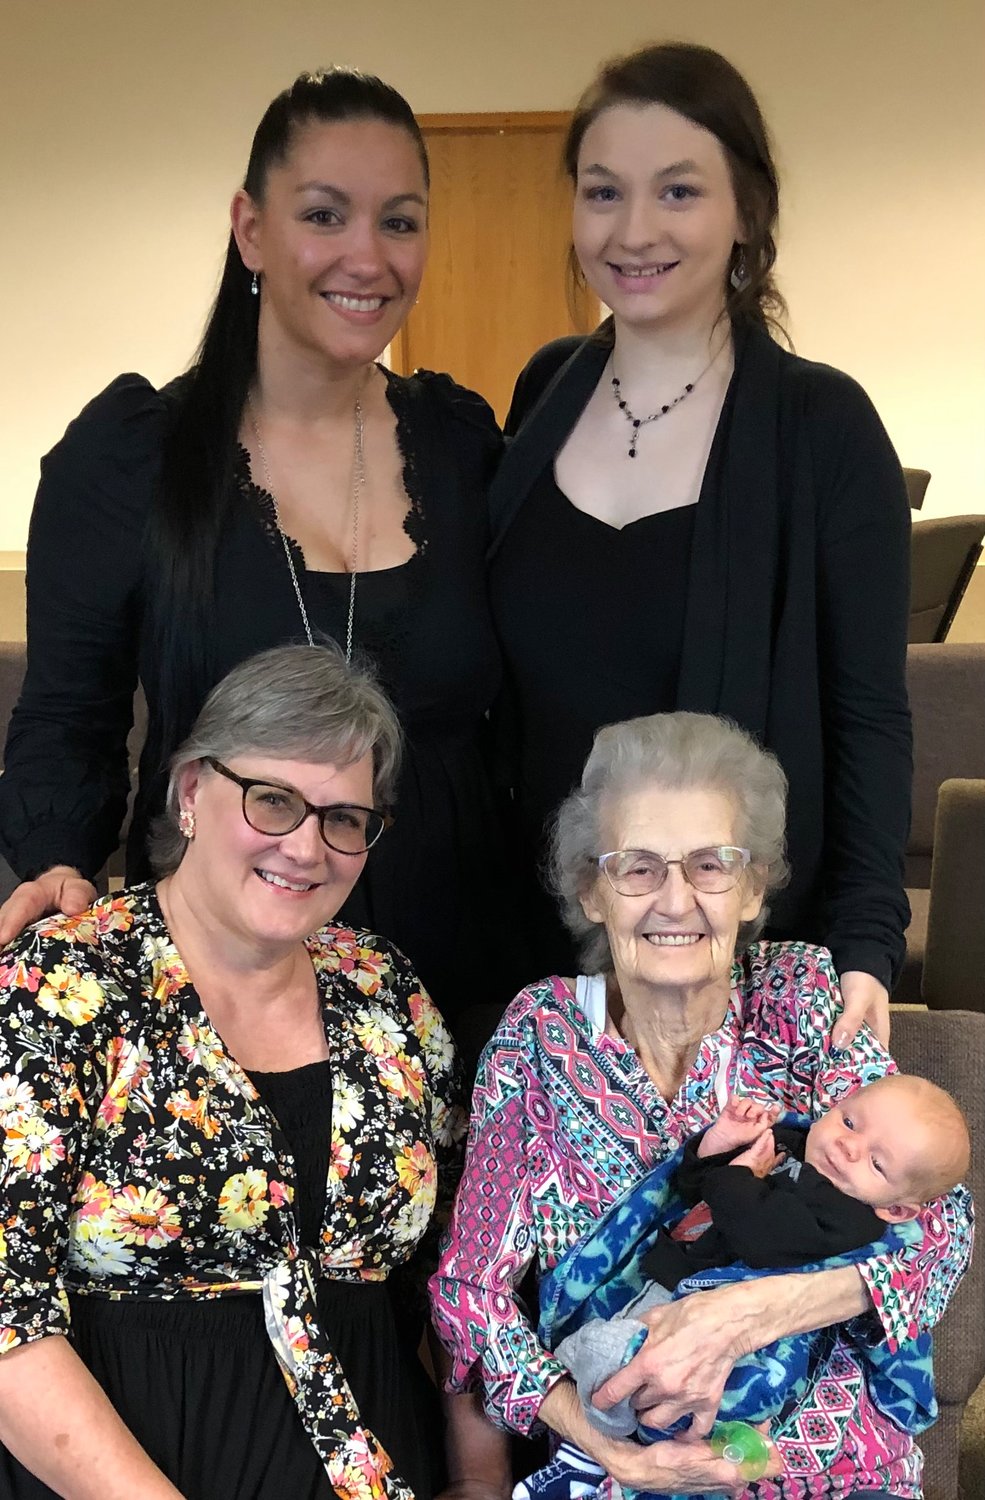 Melodee Bailey, of Chehalis, shared this photograph of five generations of her family in one photograph. Pictured are great-great-grandmother Theola Owen, great-grandmother Kimberlee Hornquist, grandmother Monica Michelle, mother Mahaila Rayne Hanson and son Michael Elijah Green.